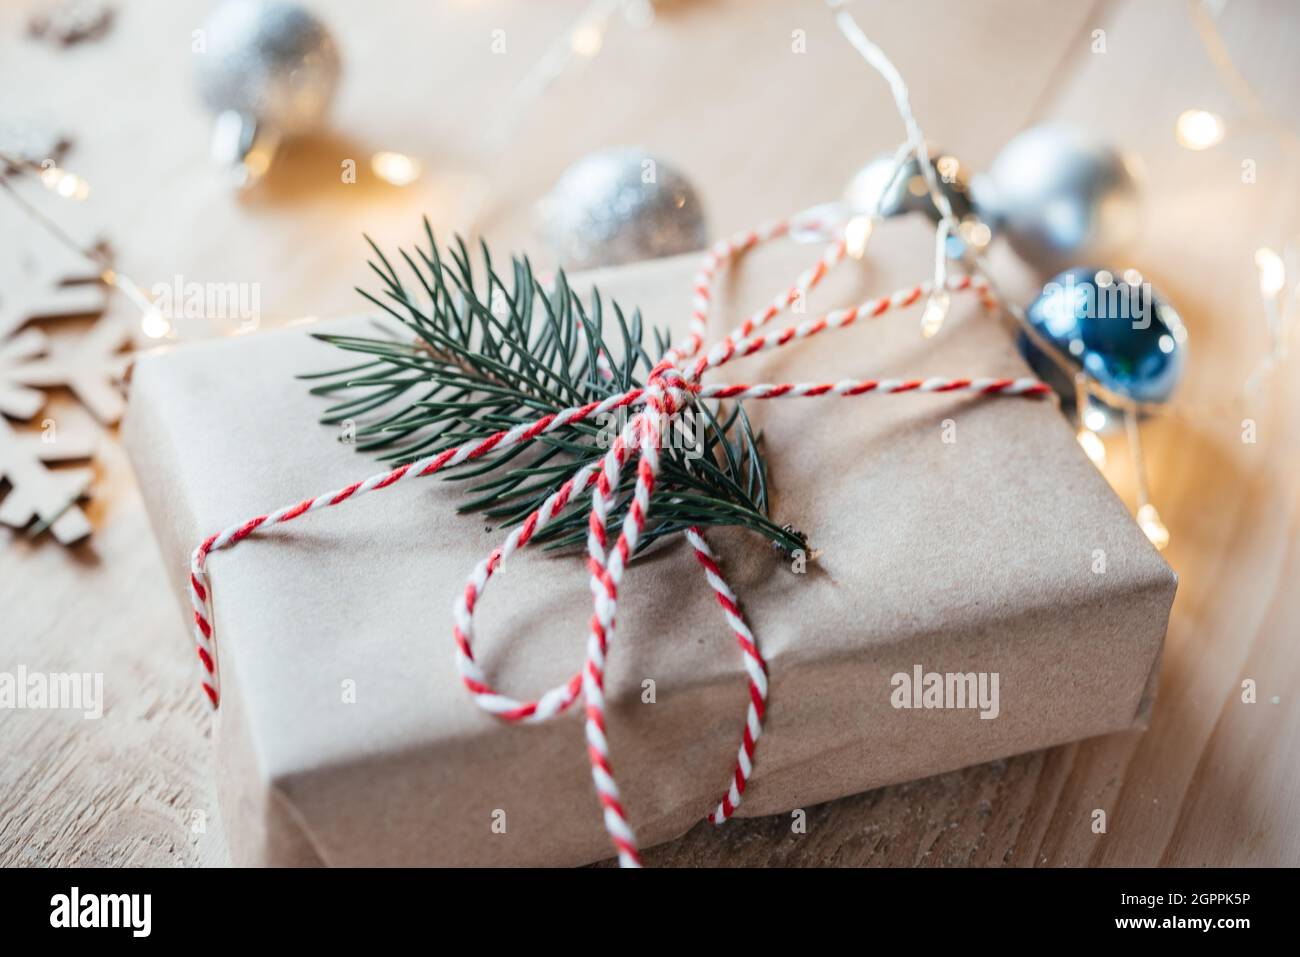 Christmas gift box wrapped in kraft paper with pine tree branch Stock Photo